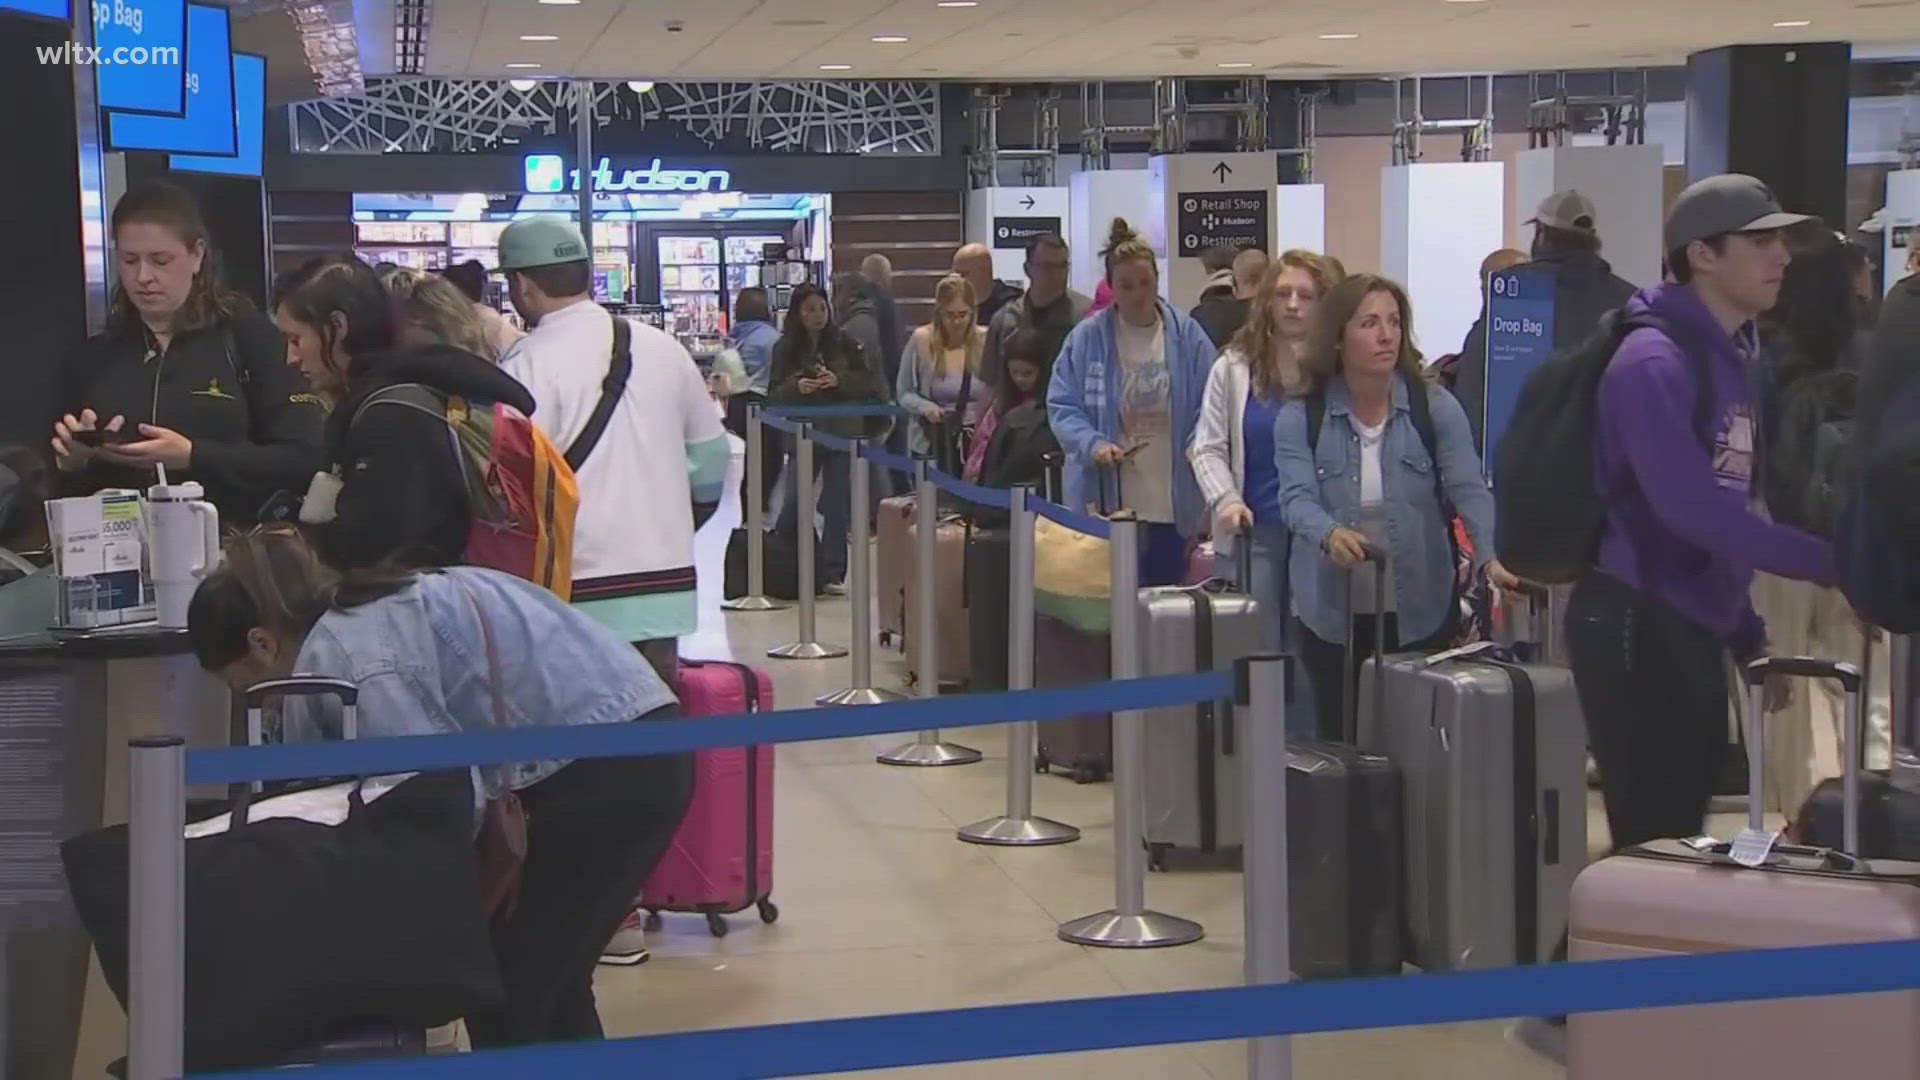 The Transportation Security Administration said Saturday that more than 2.9 million travelers were screened at U.S. airports on Friday, surpassing a previous record.